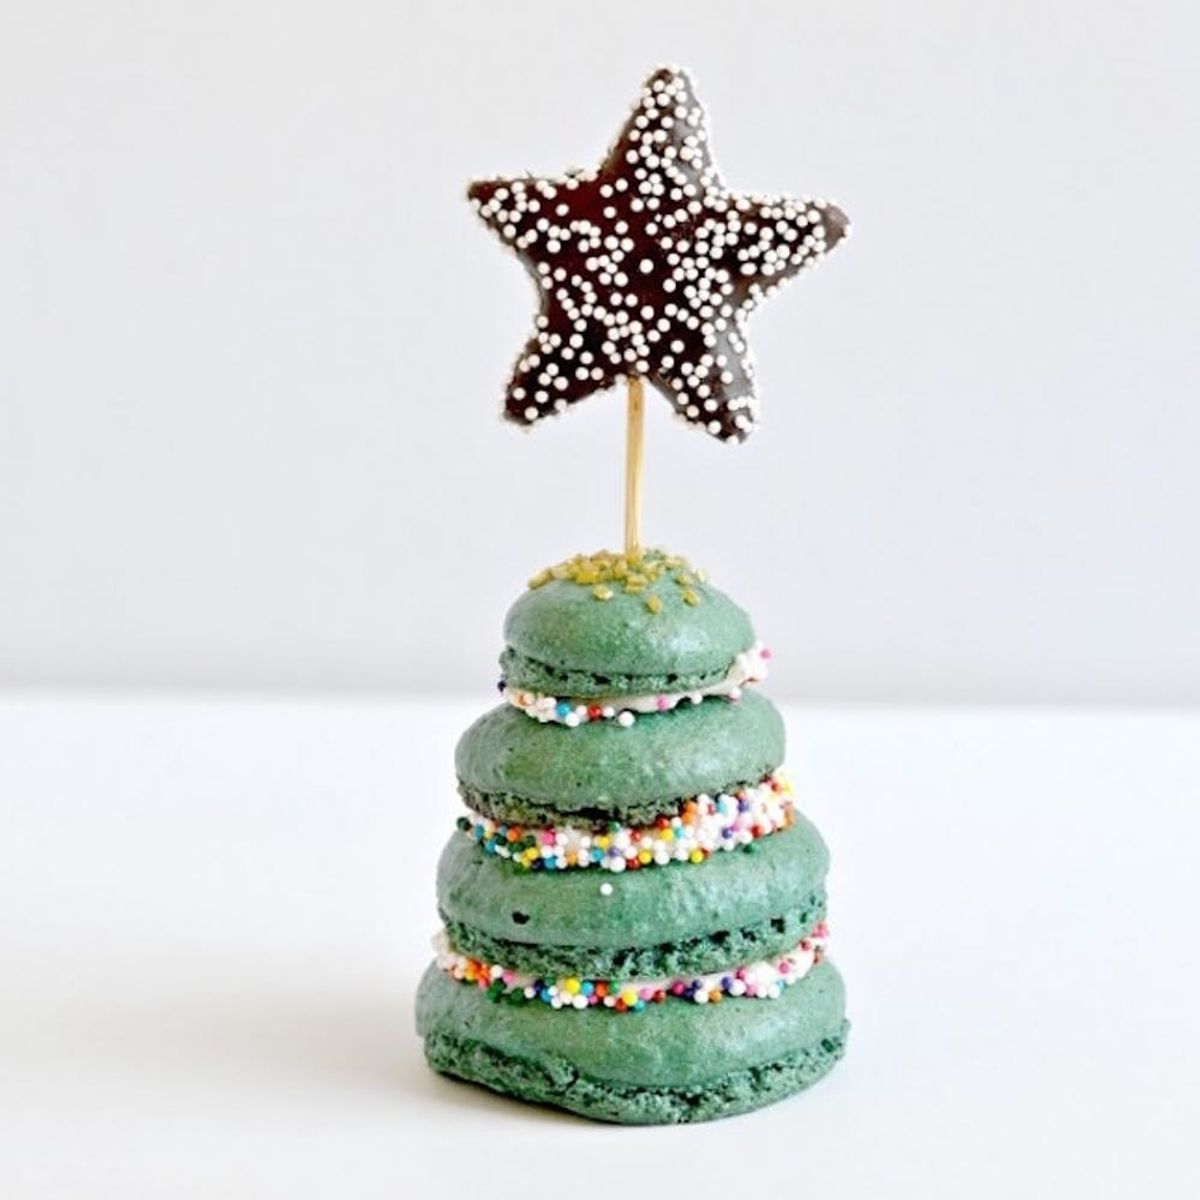 12 Holiday Macaron Recipes That Are *Almost* Too Pretty to Eat